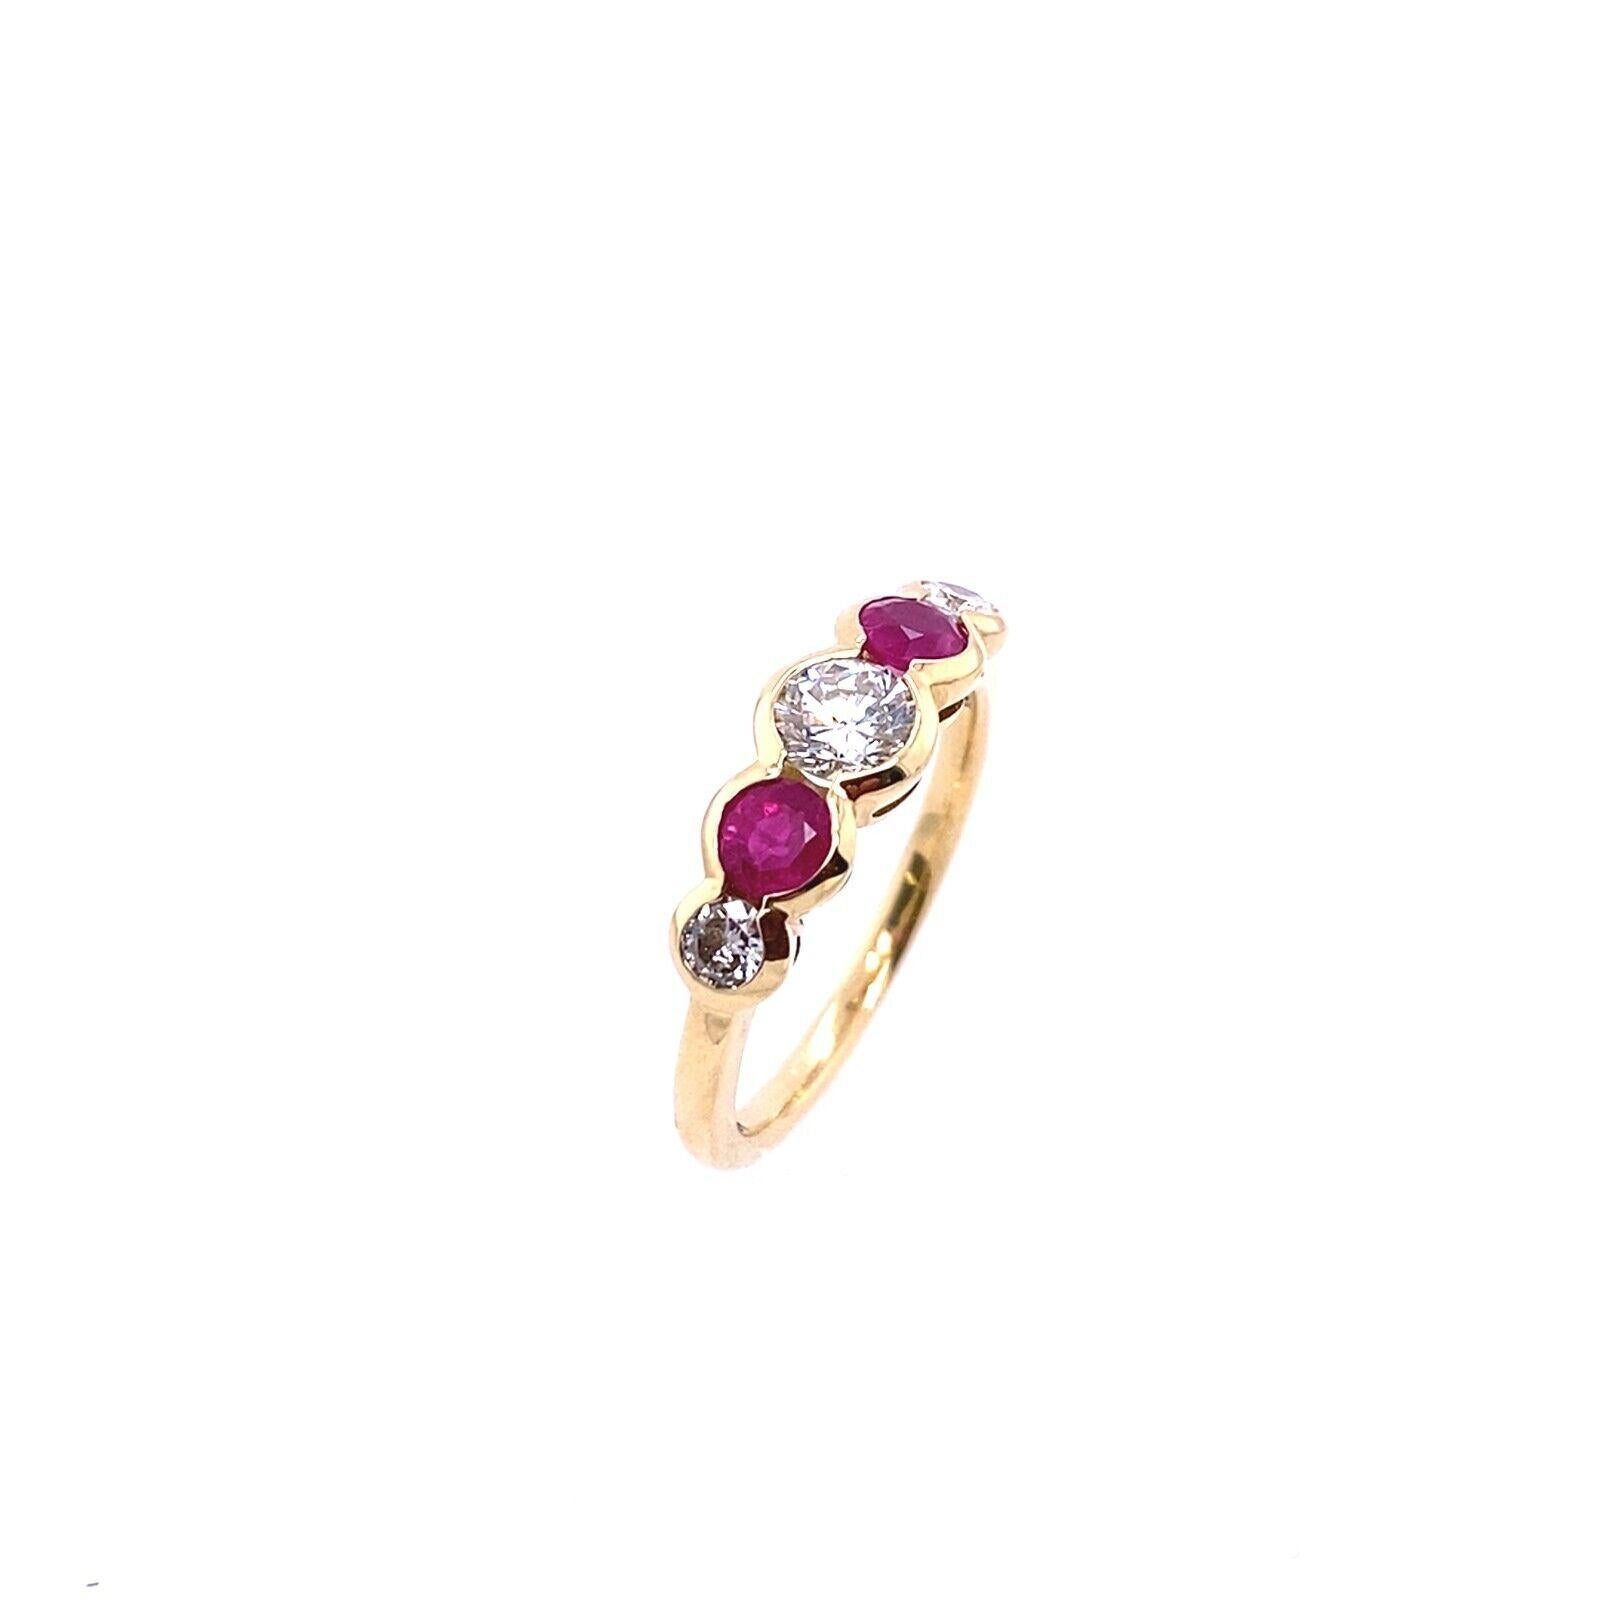 Vintage 5-Stone Diamond Ruby & Diamond Ring,Set In 18ct Yellow Gold
An elegant half eternity/Dress ring, this vintage 5-stone ring features three round Diamonds and two round natural Rubies set in a graduated five stone rub over setting. The ring is